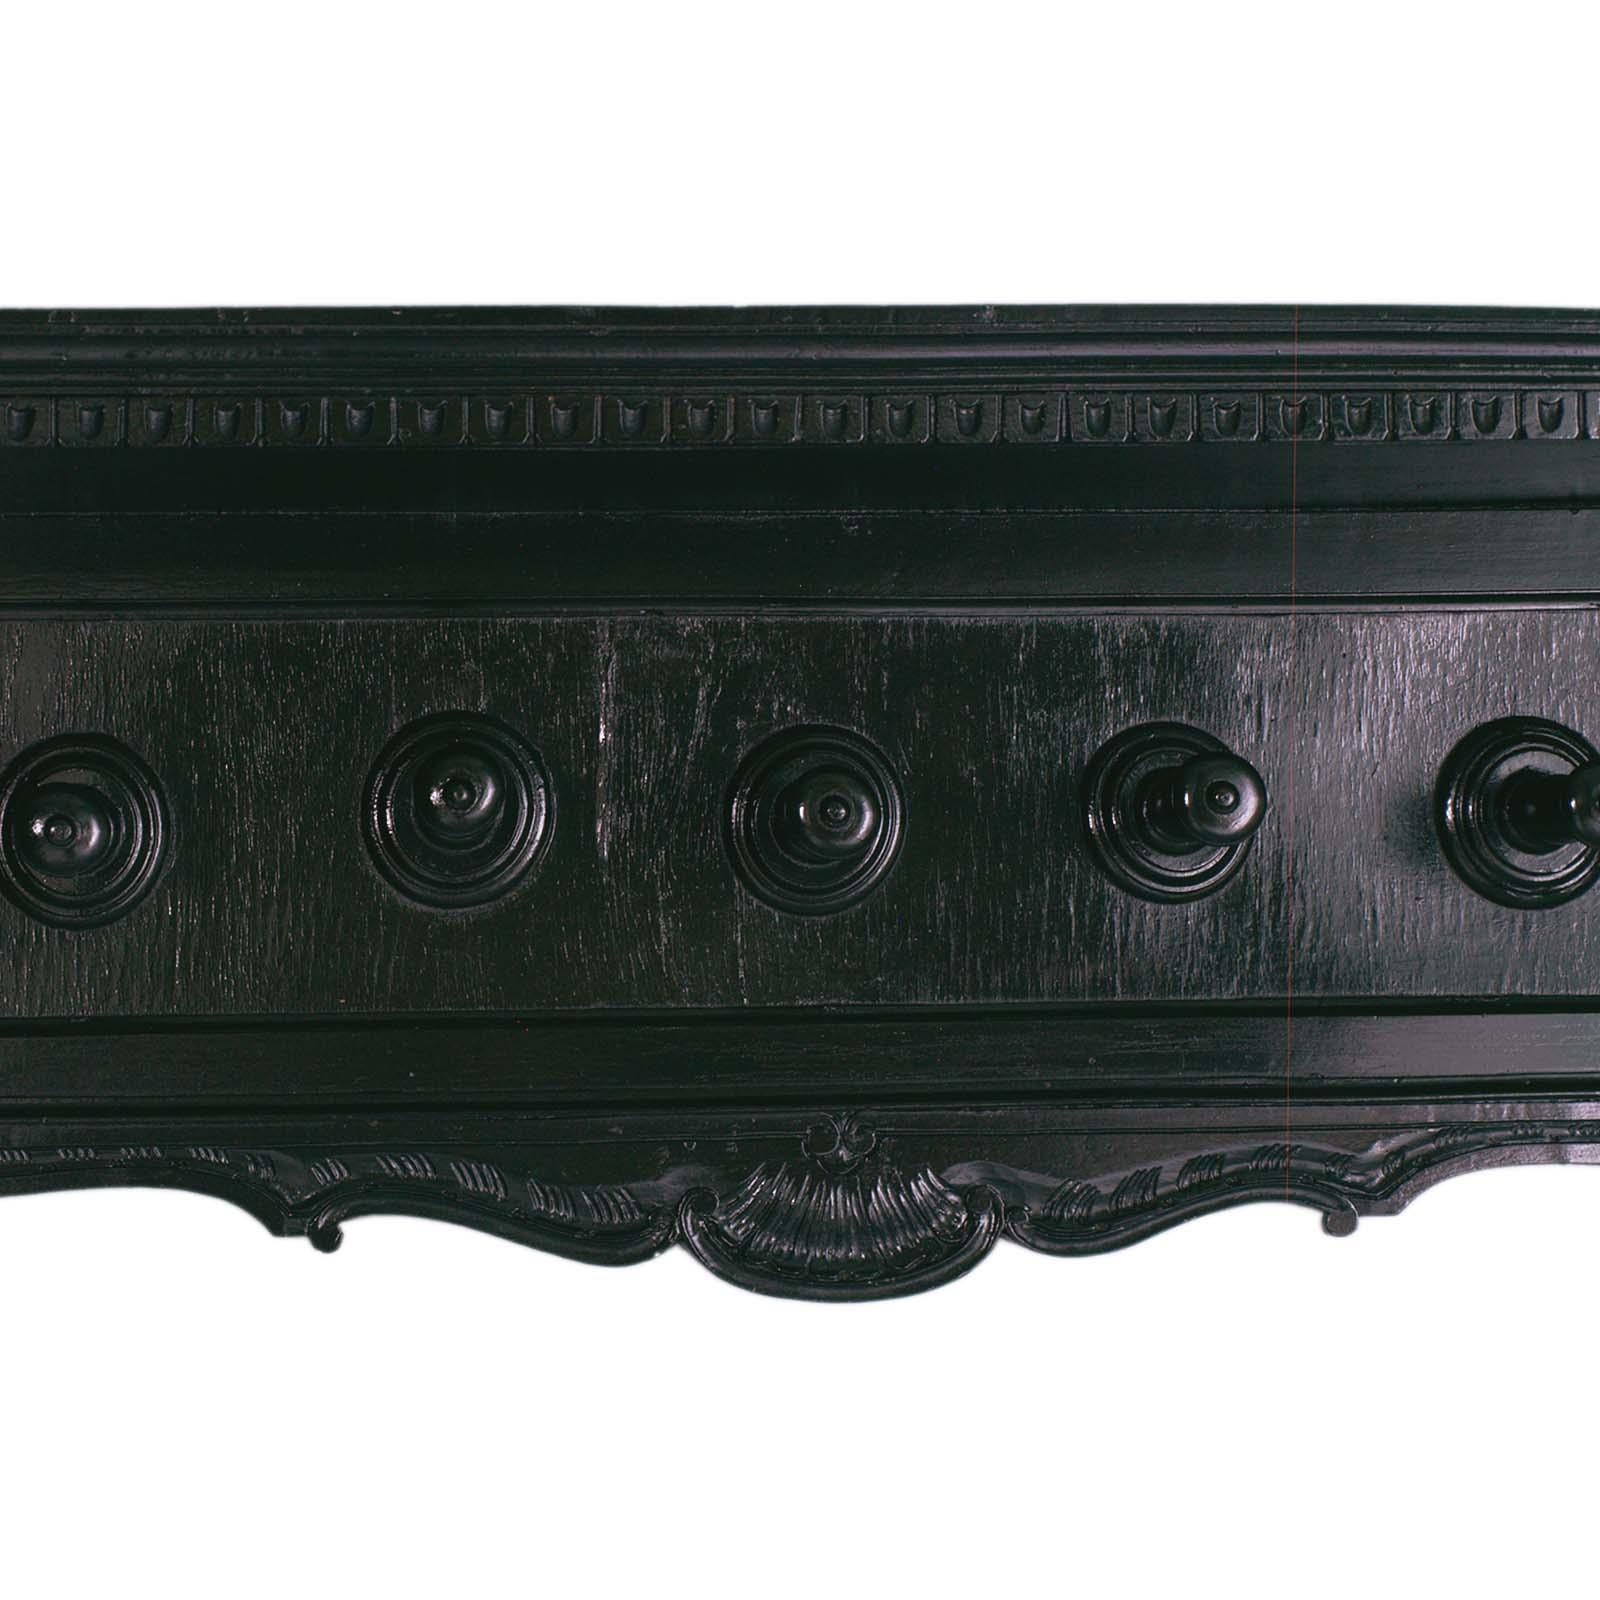 European Early 1900s Carved Ebonized Walnut, by Dini & Puccini, Cascina, Tuscany, Italy For Sale